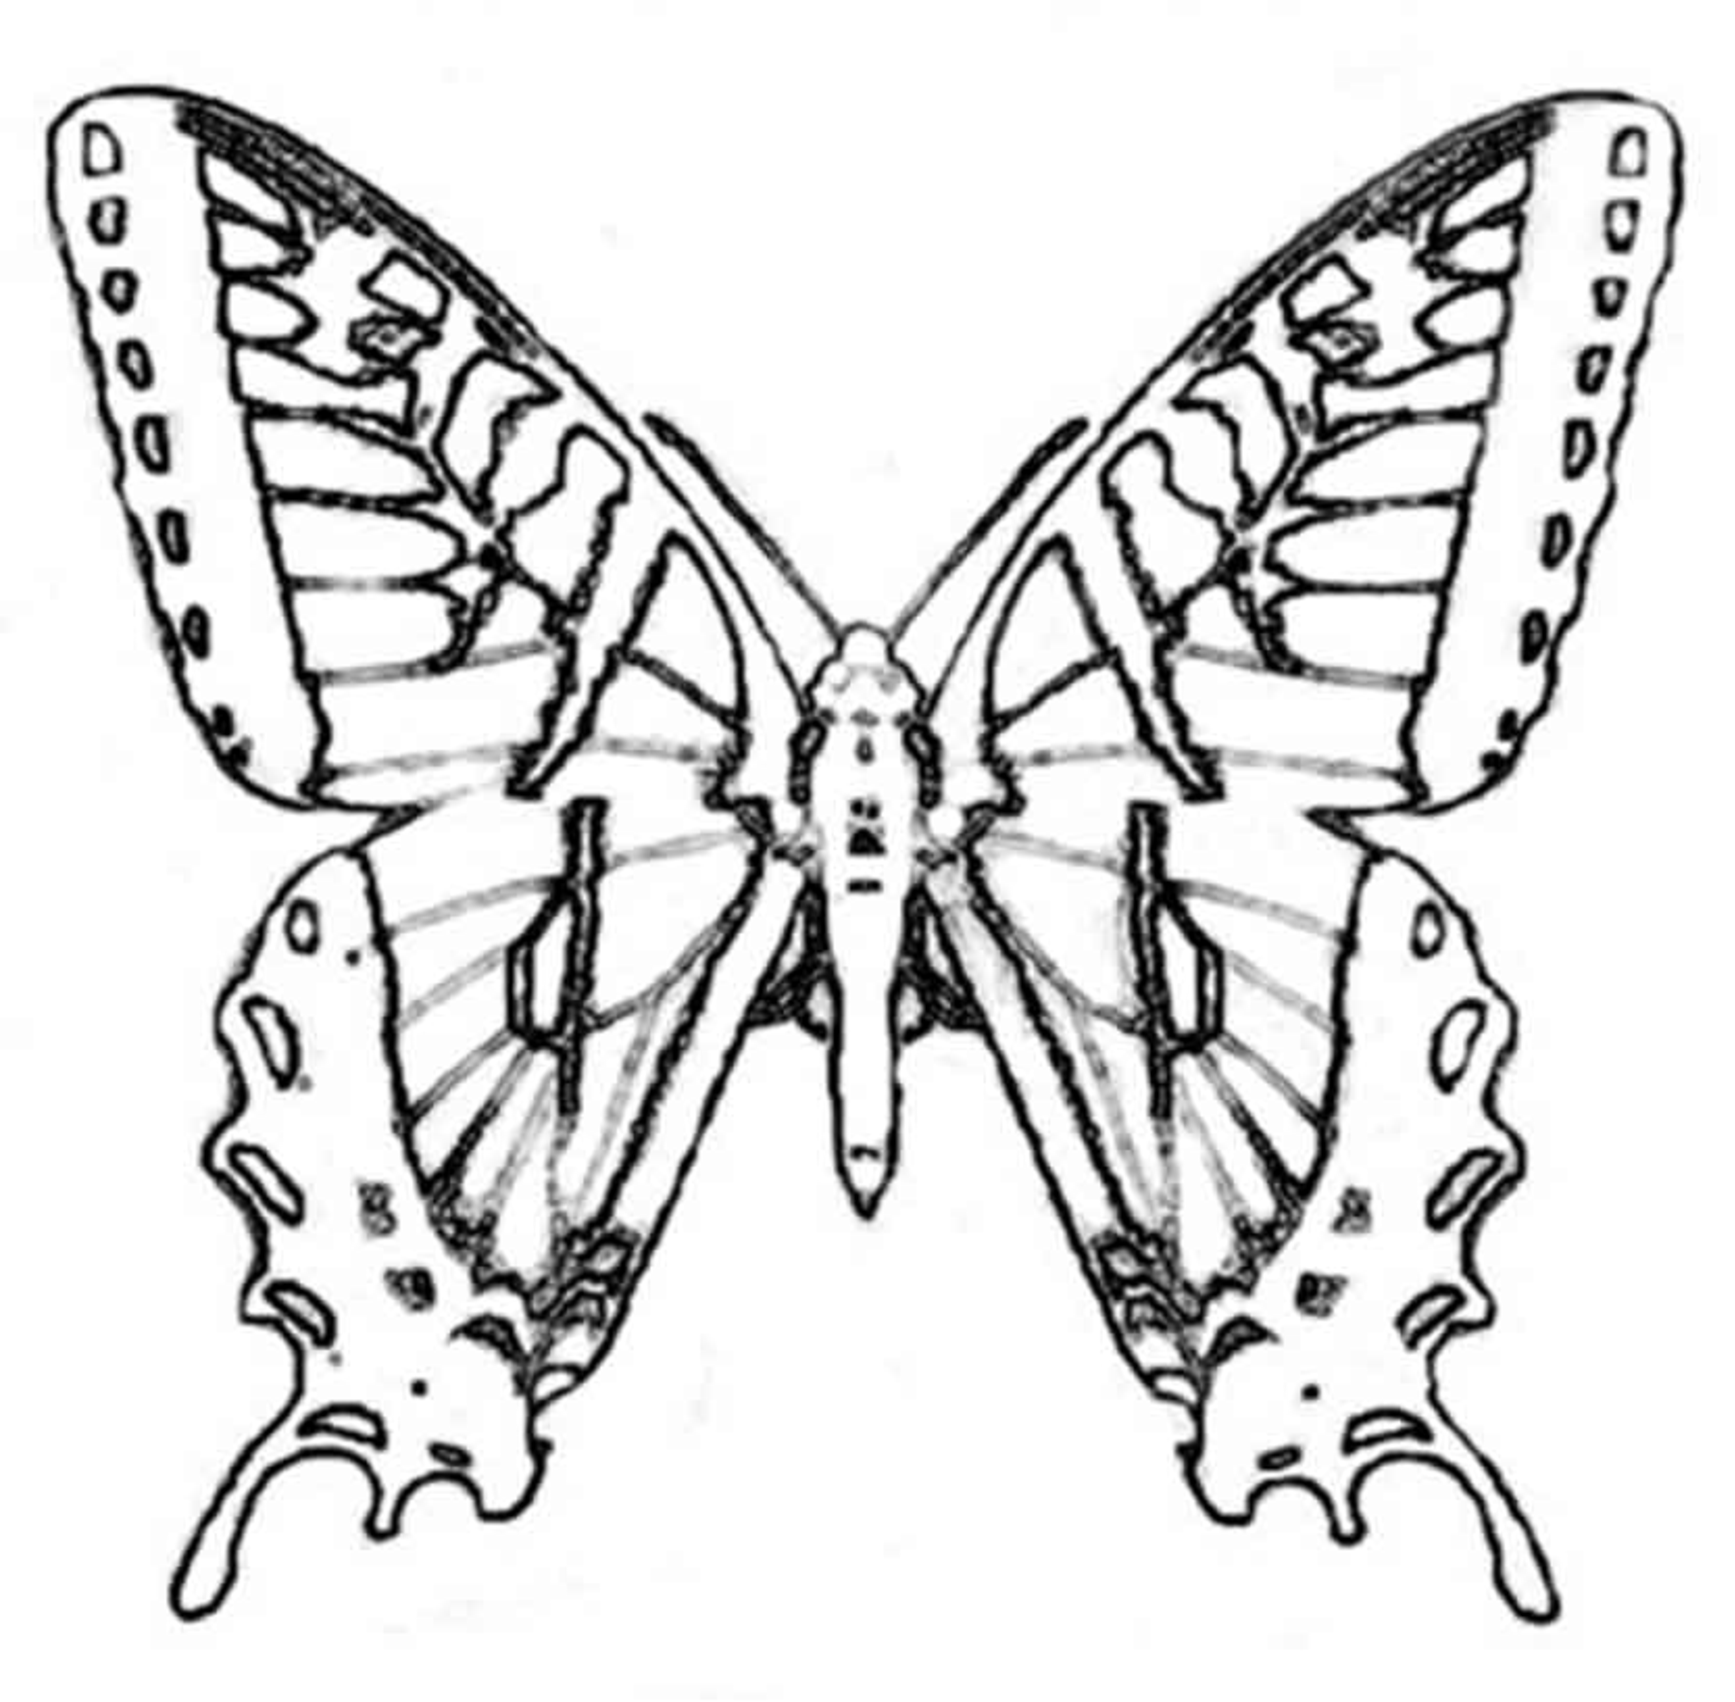 Swallowtail Butterfly coloring, Download Swallowtail Butterfly coloring